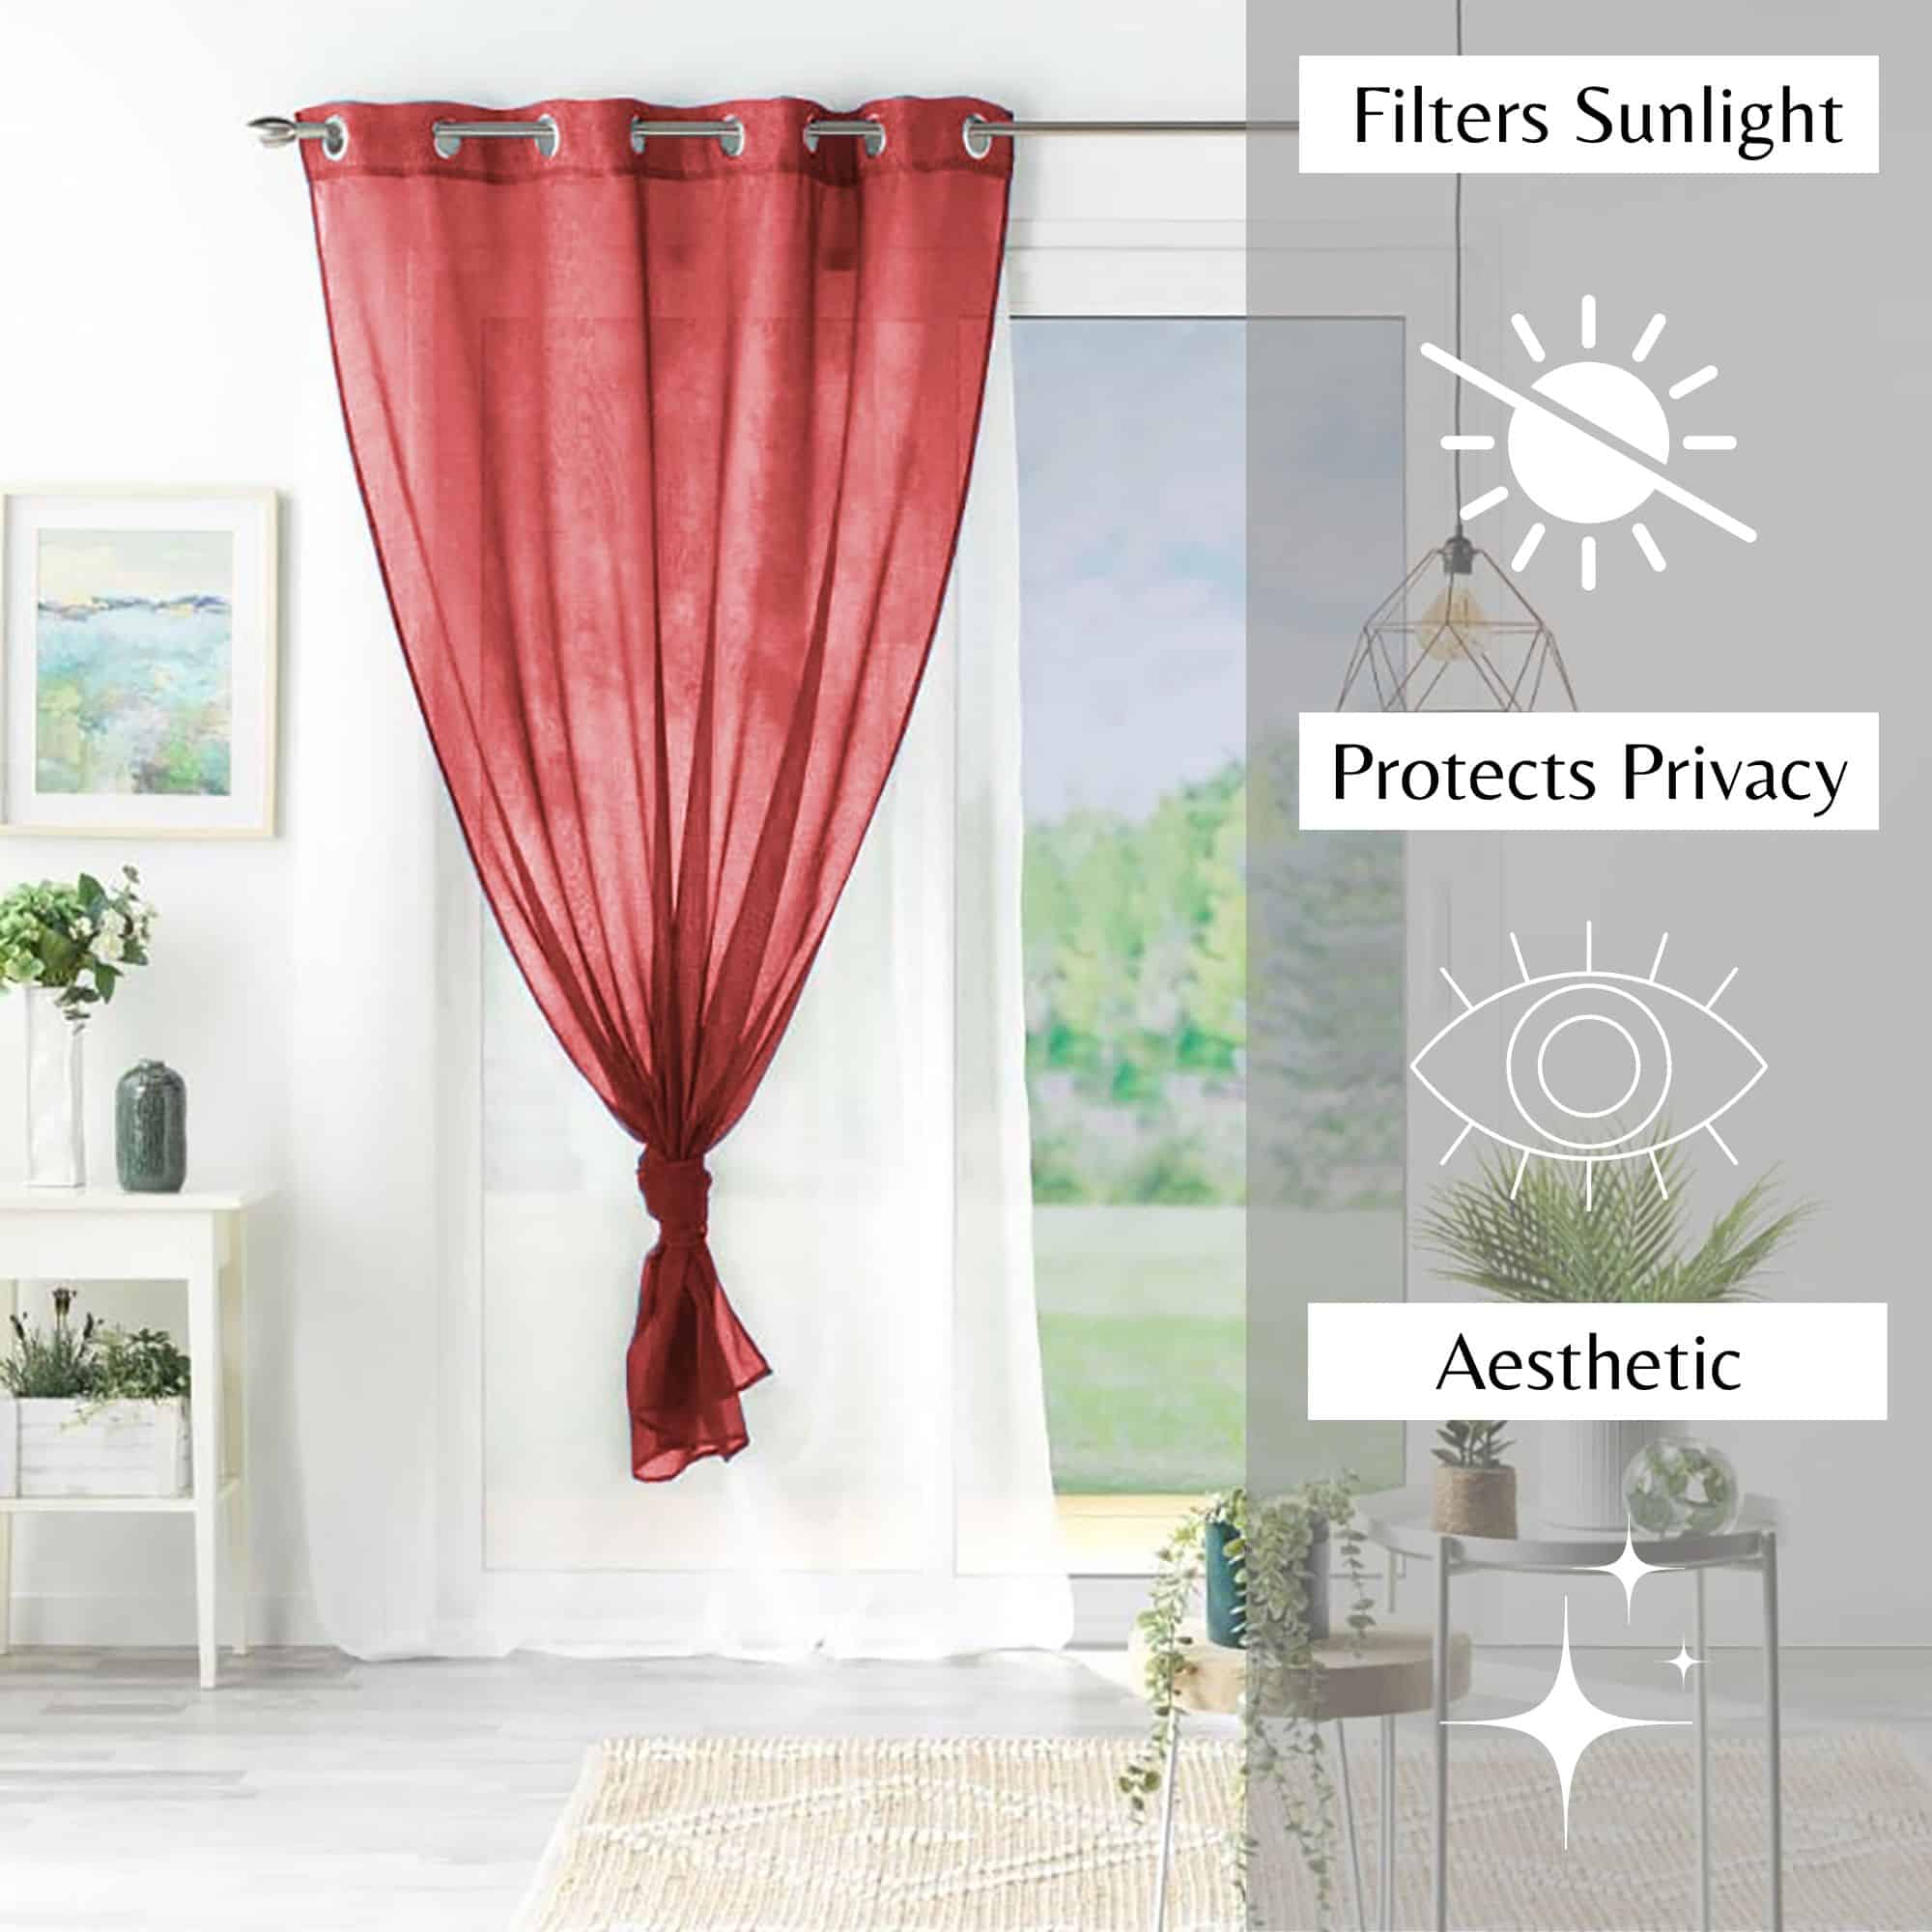 filter sunlight protect privacy aesthetic red and white voile curtain panels x 2 for interior design